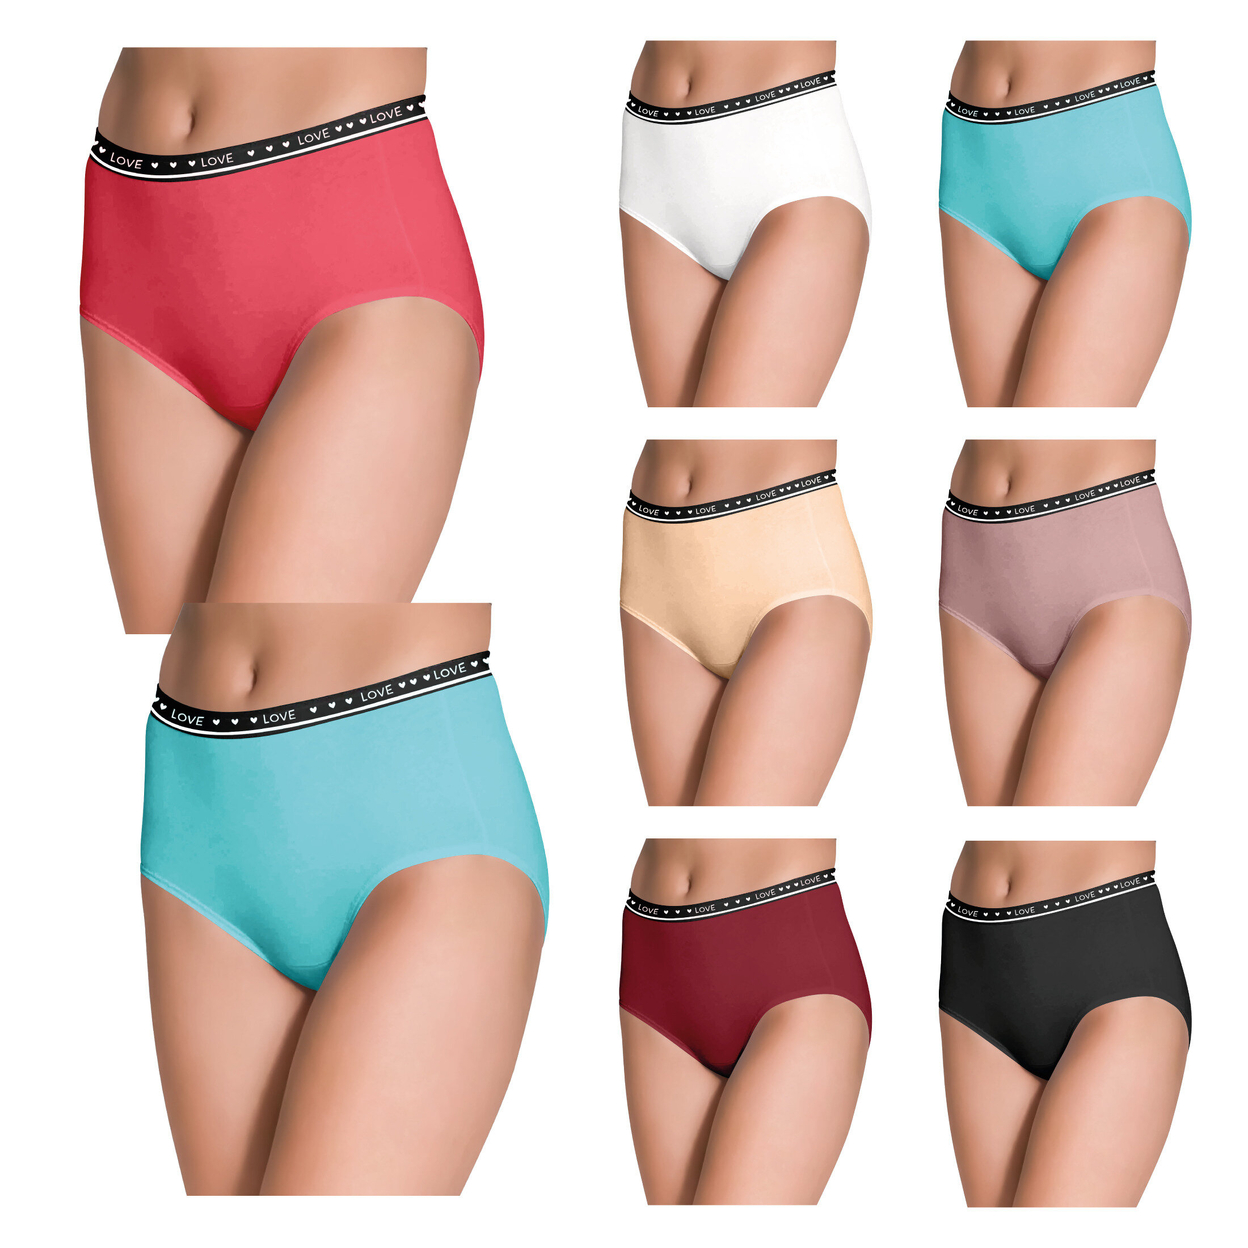 3-Pack: Women's Ultra Soft Moisture Wicking Panties Cotton Perfect Fit Underwear (Plus Sizes Available) - Xx-large